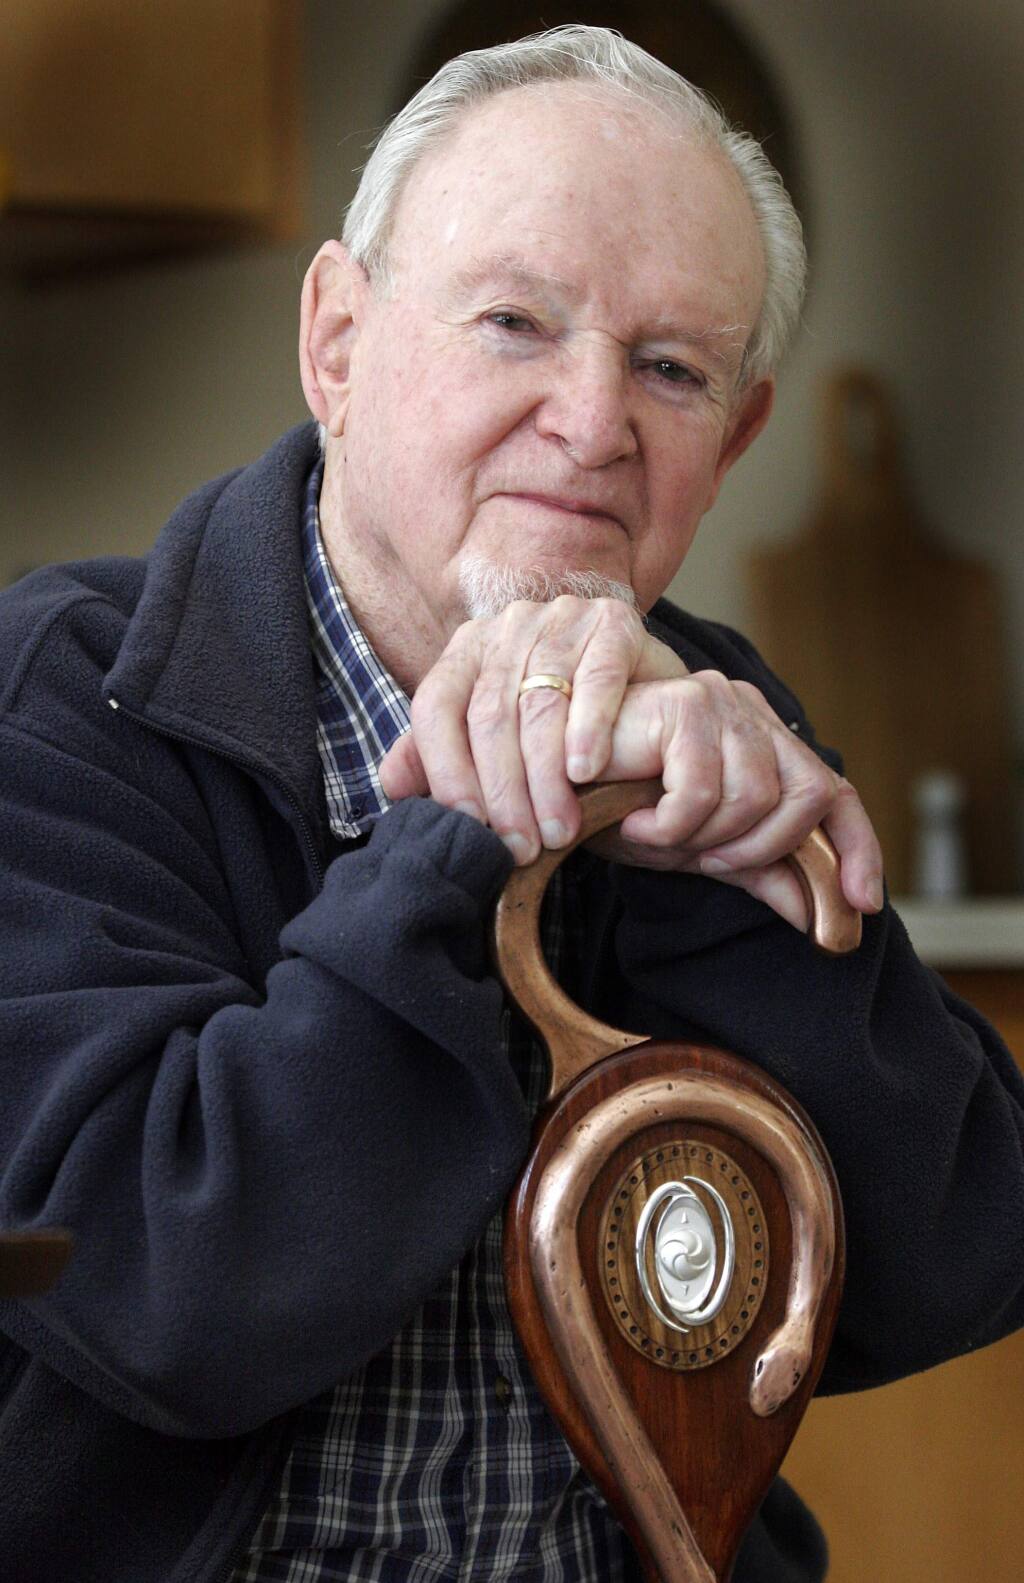 Civil rights award winner George Houser with the cane given to him in South Africa, in a 2010 file photo. (PRESS DEMOCRAT)